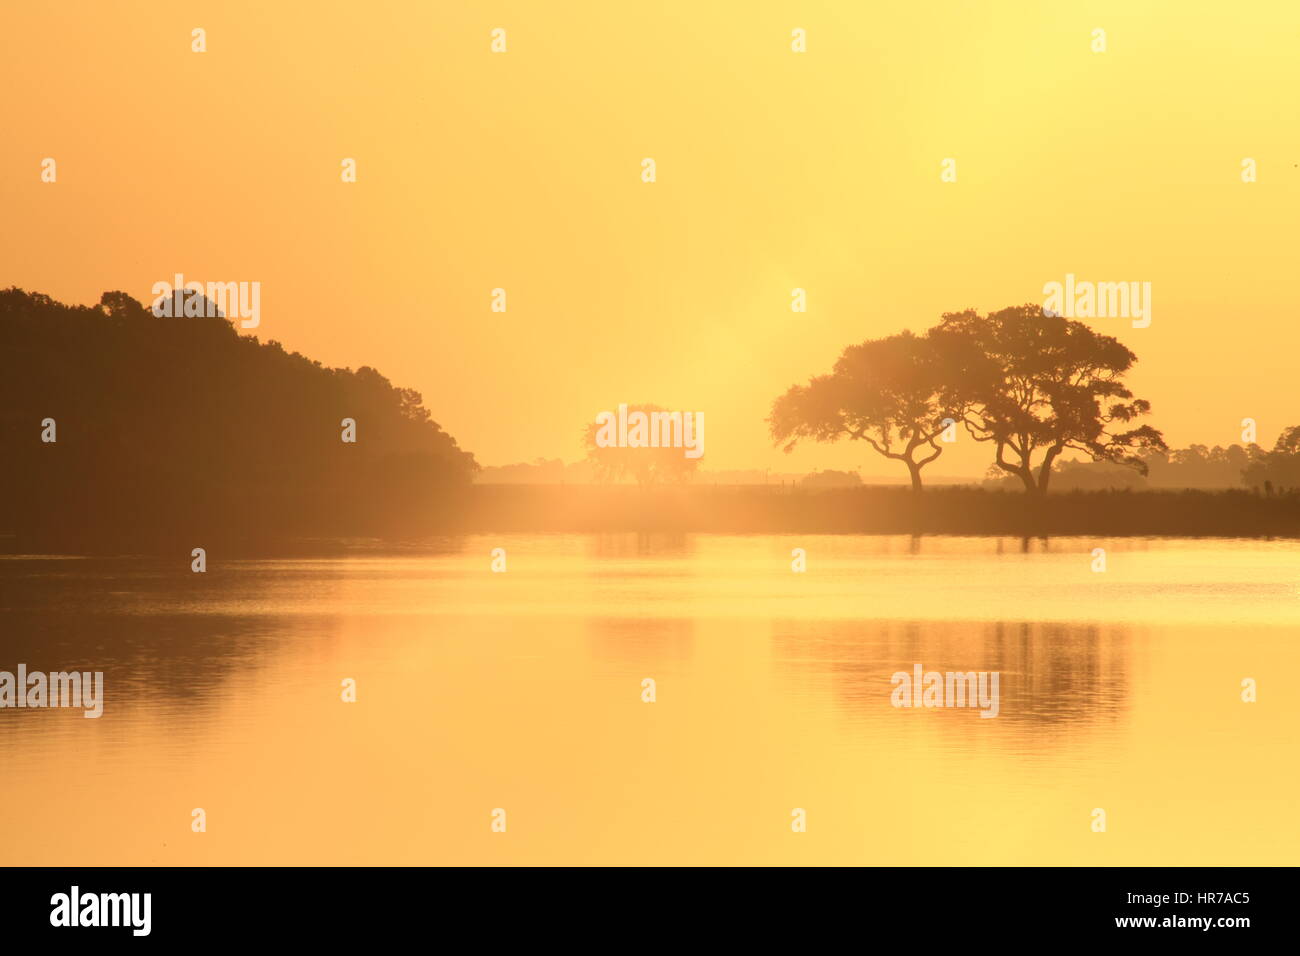 Sunrise on Bass Pond on Kiawah Island, South Carolina. The sky is golden and there's a pretty reflection of Live Oak trees in the water. Stock Photo